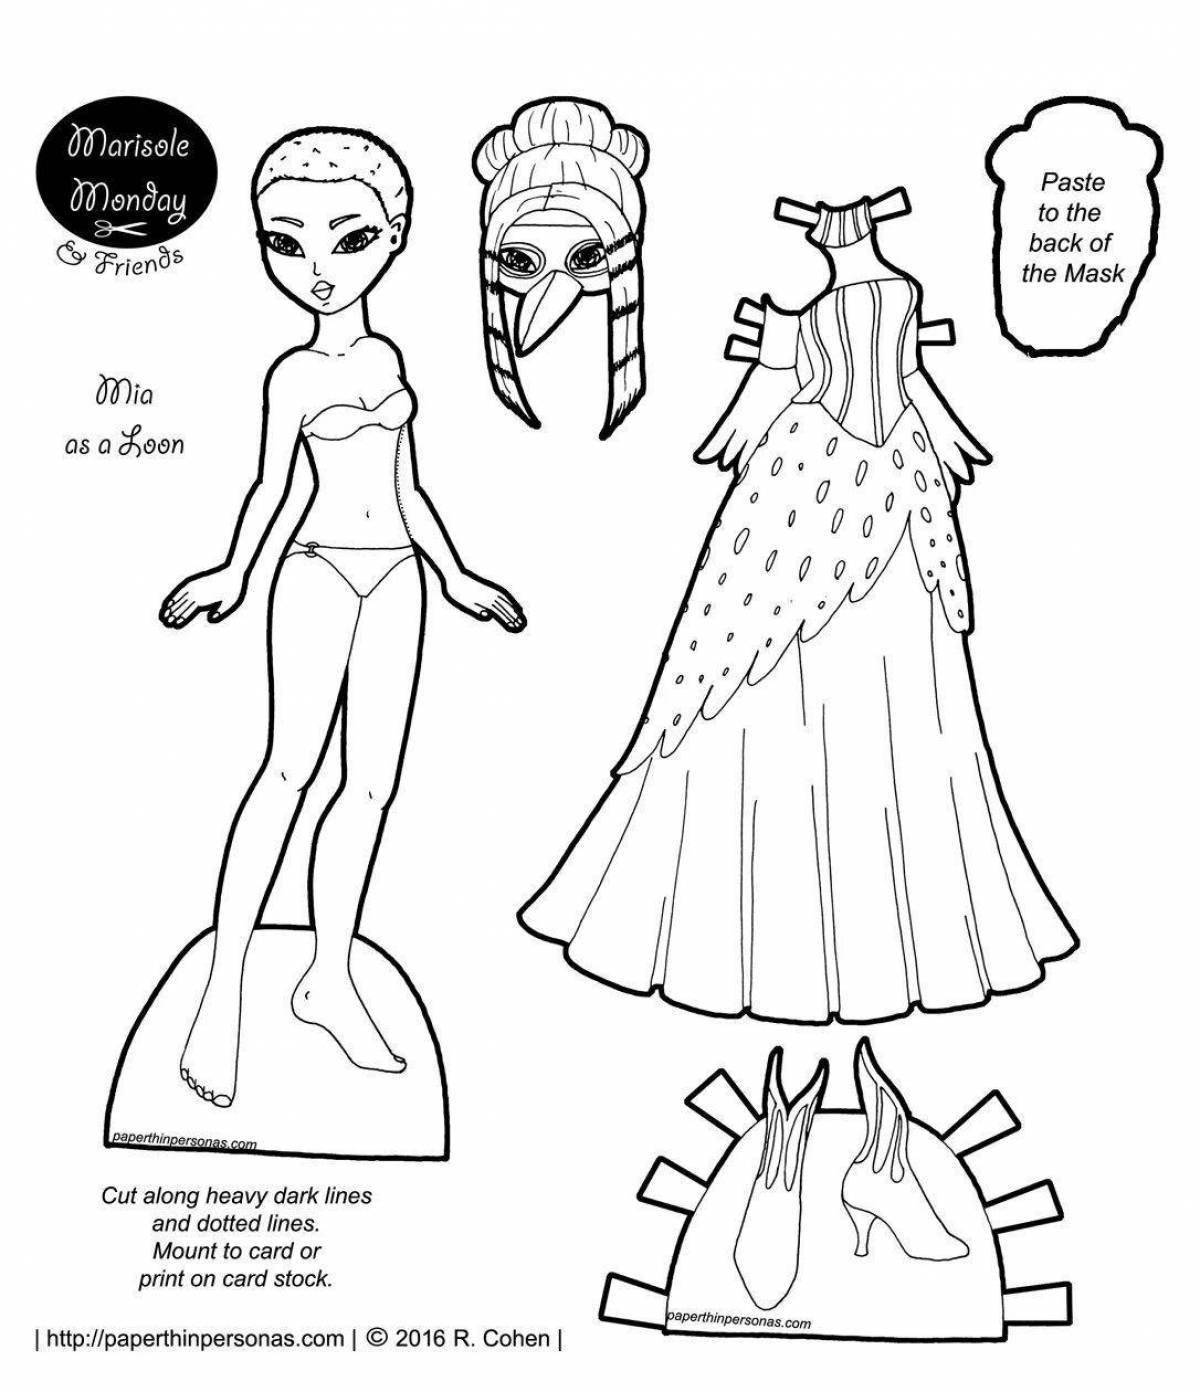 Playful paper doll with clothes